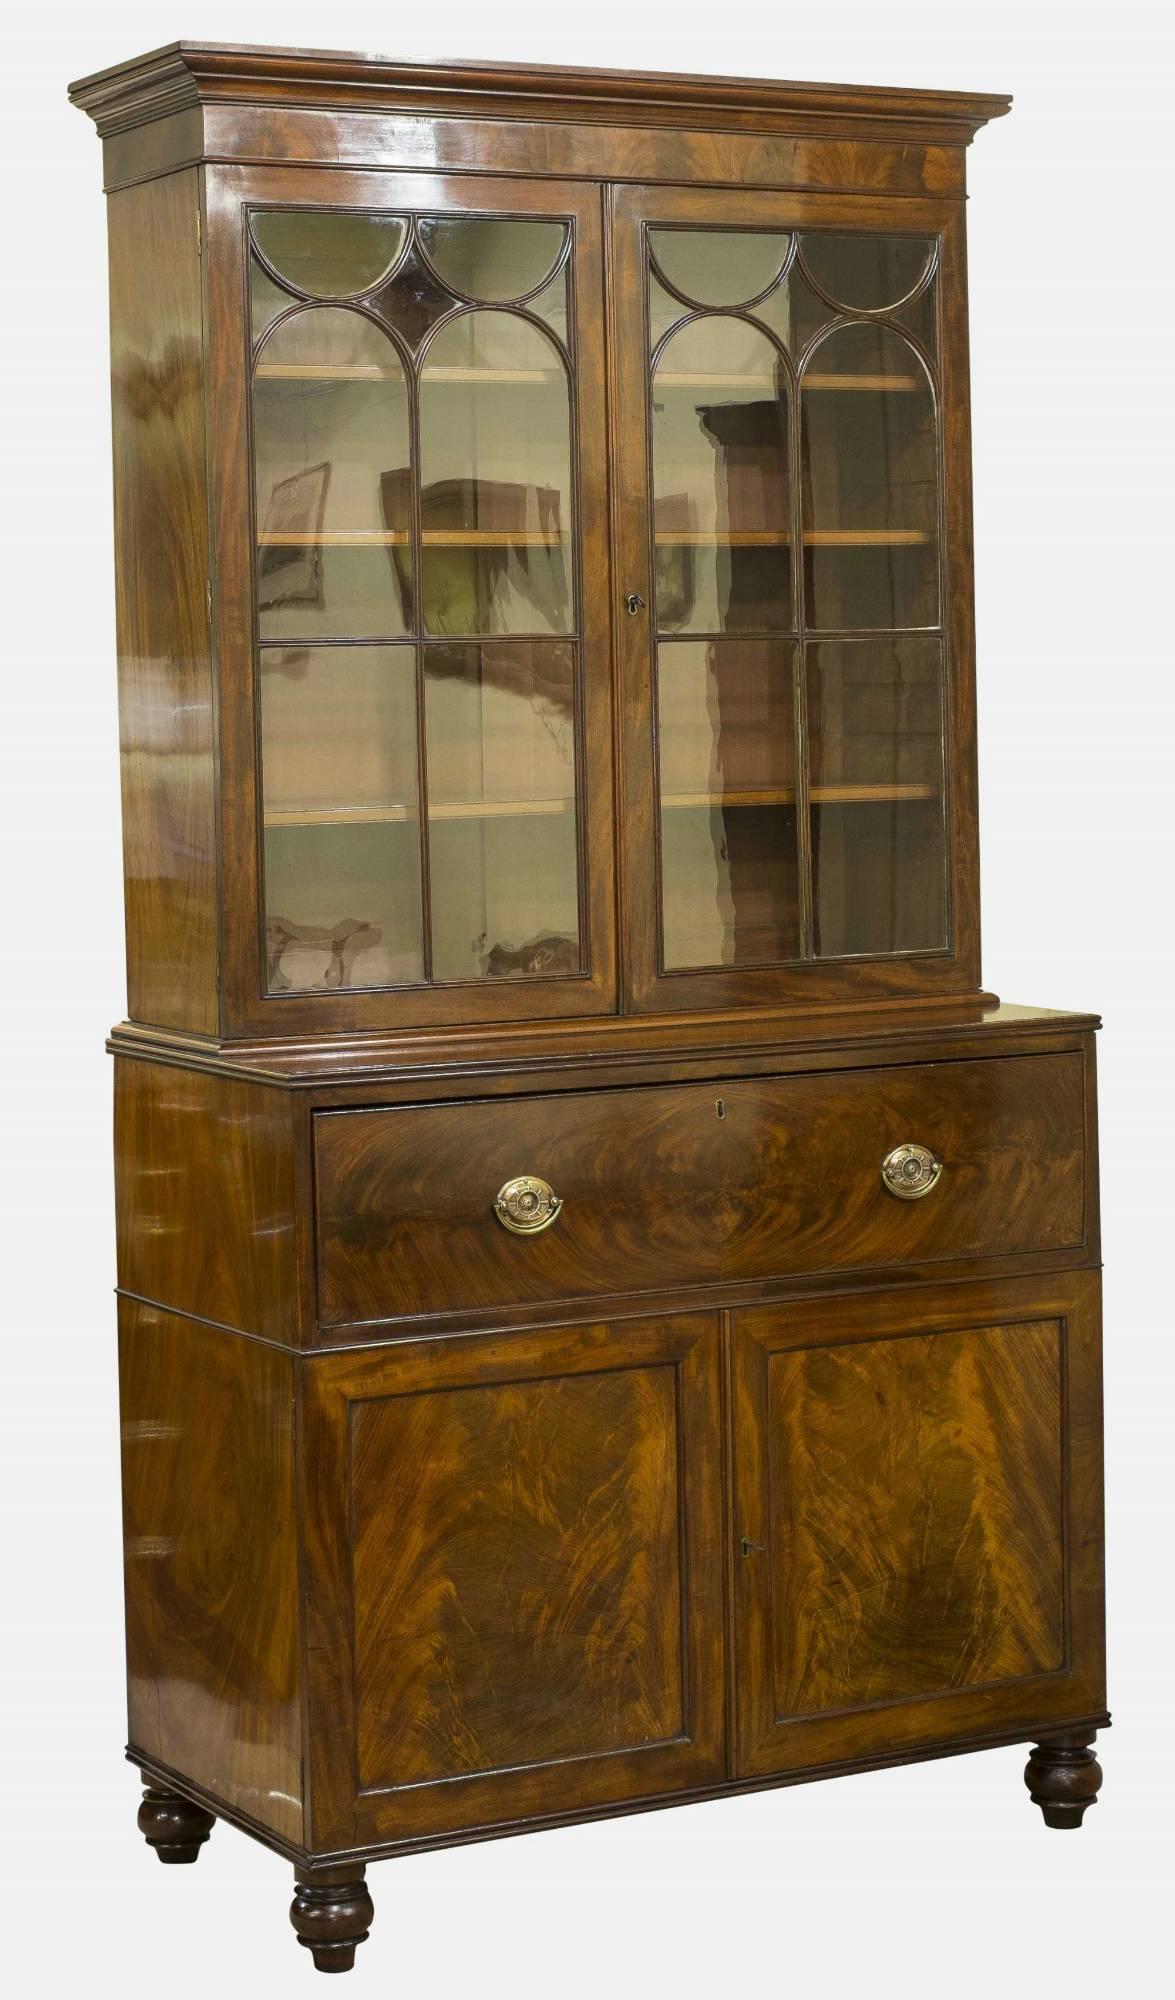 A very good William IV mahogany secretaire bookcase. The fall front enclosing an arrangement of drawers and pigeon holes, having an astragal glazed bookcase above circa 1830.